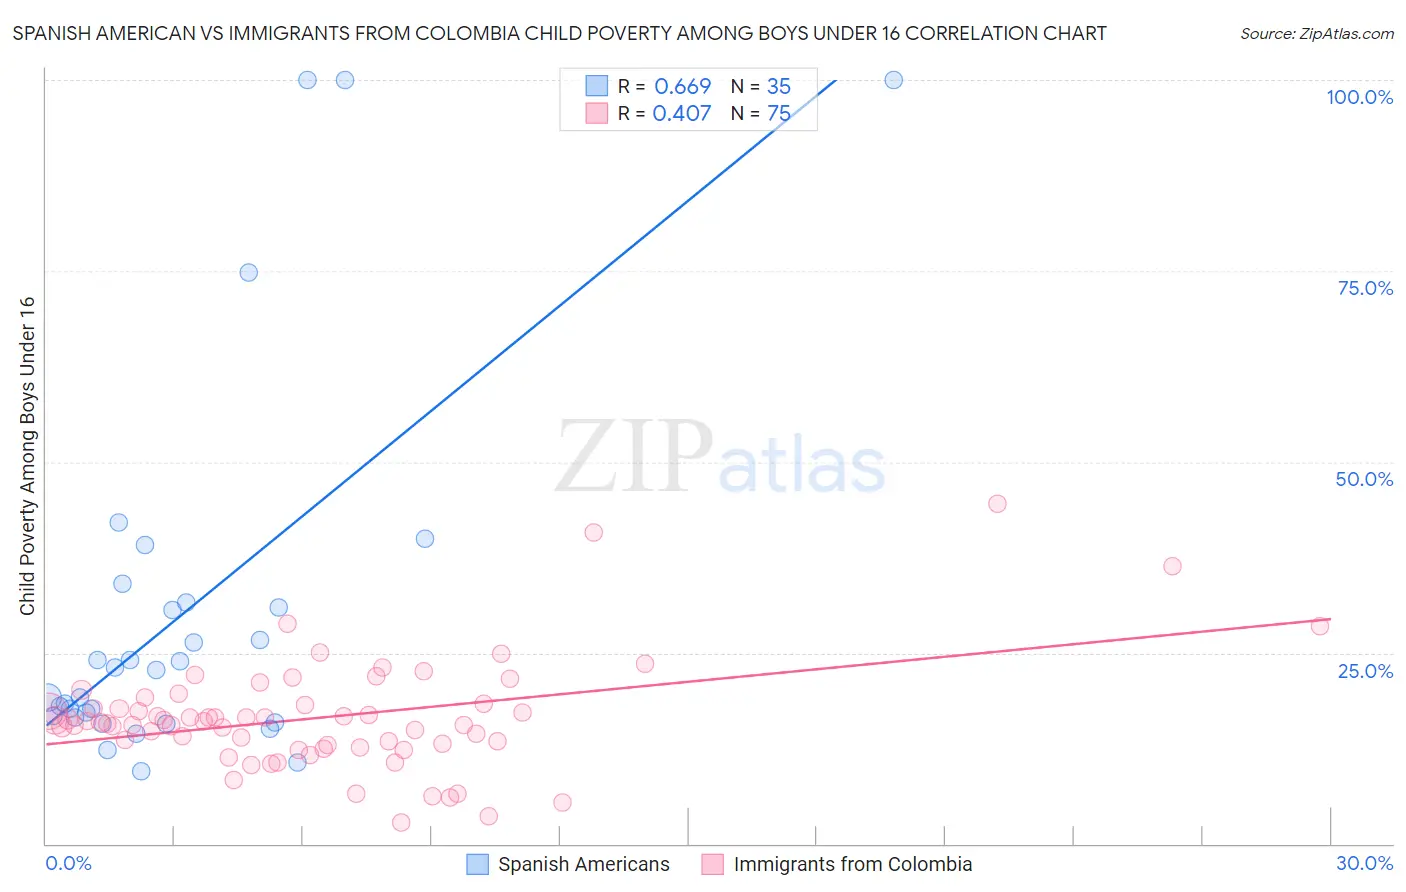 Spanish American vs Immigrants from Colombia Child Poverty Among Boys Under 16